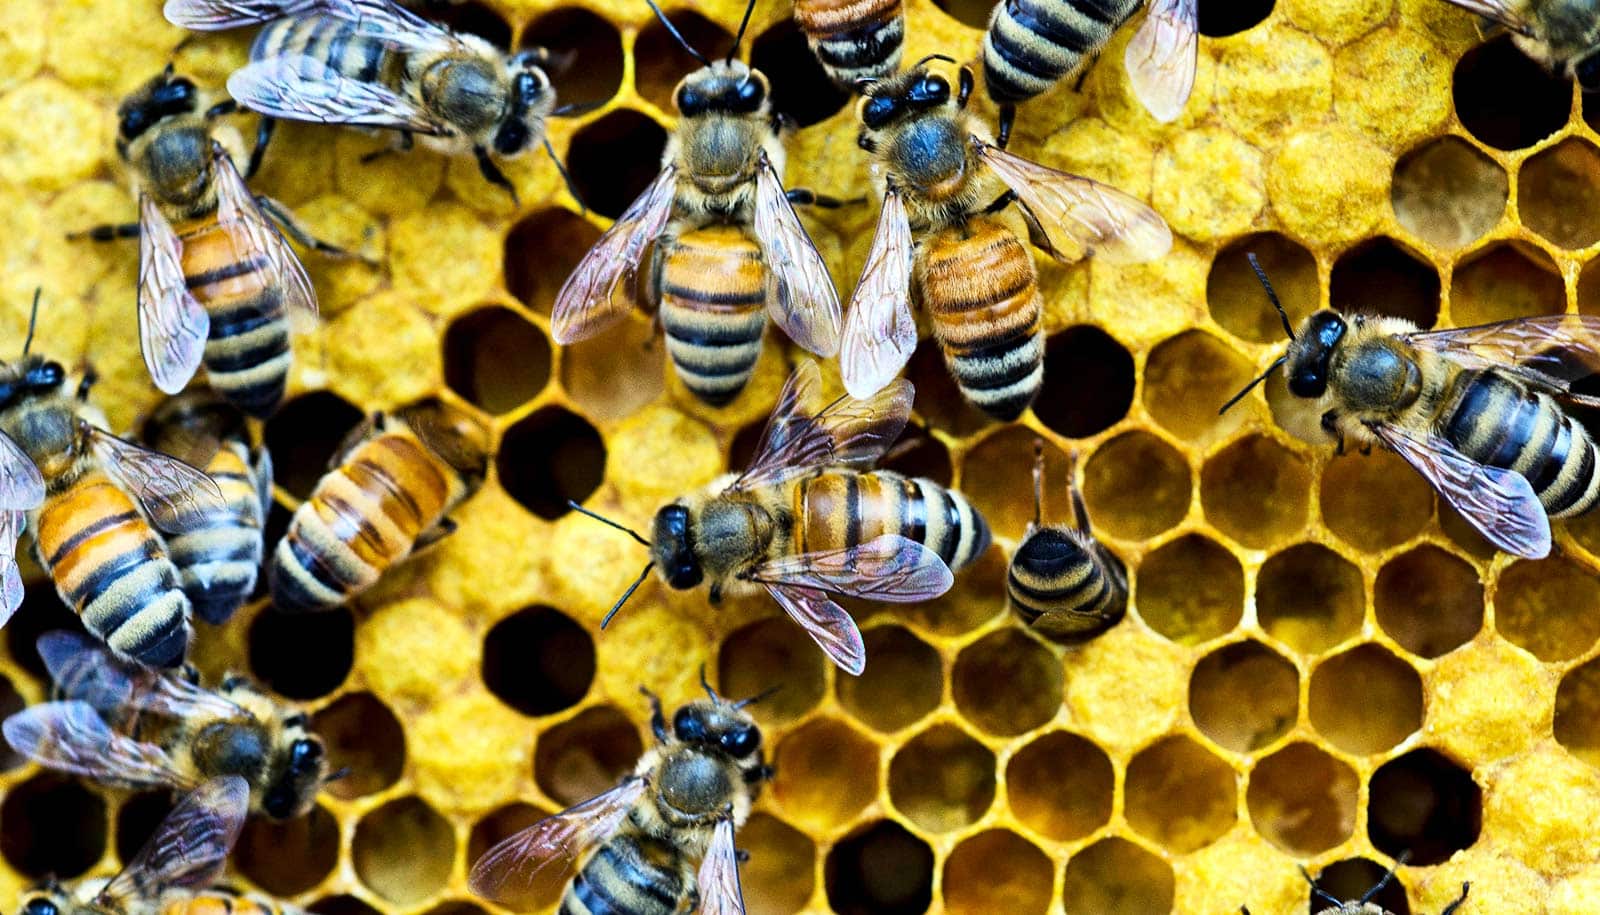 https://www.futurity.org/wp/wp-content/uploads/2020/01/honey_bees_microbiomes_varroa_mites_1600.jpg